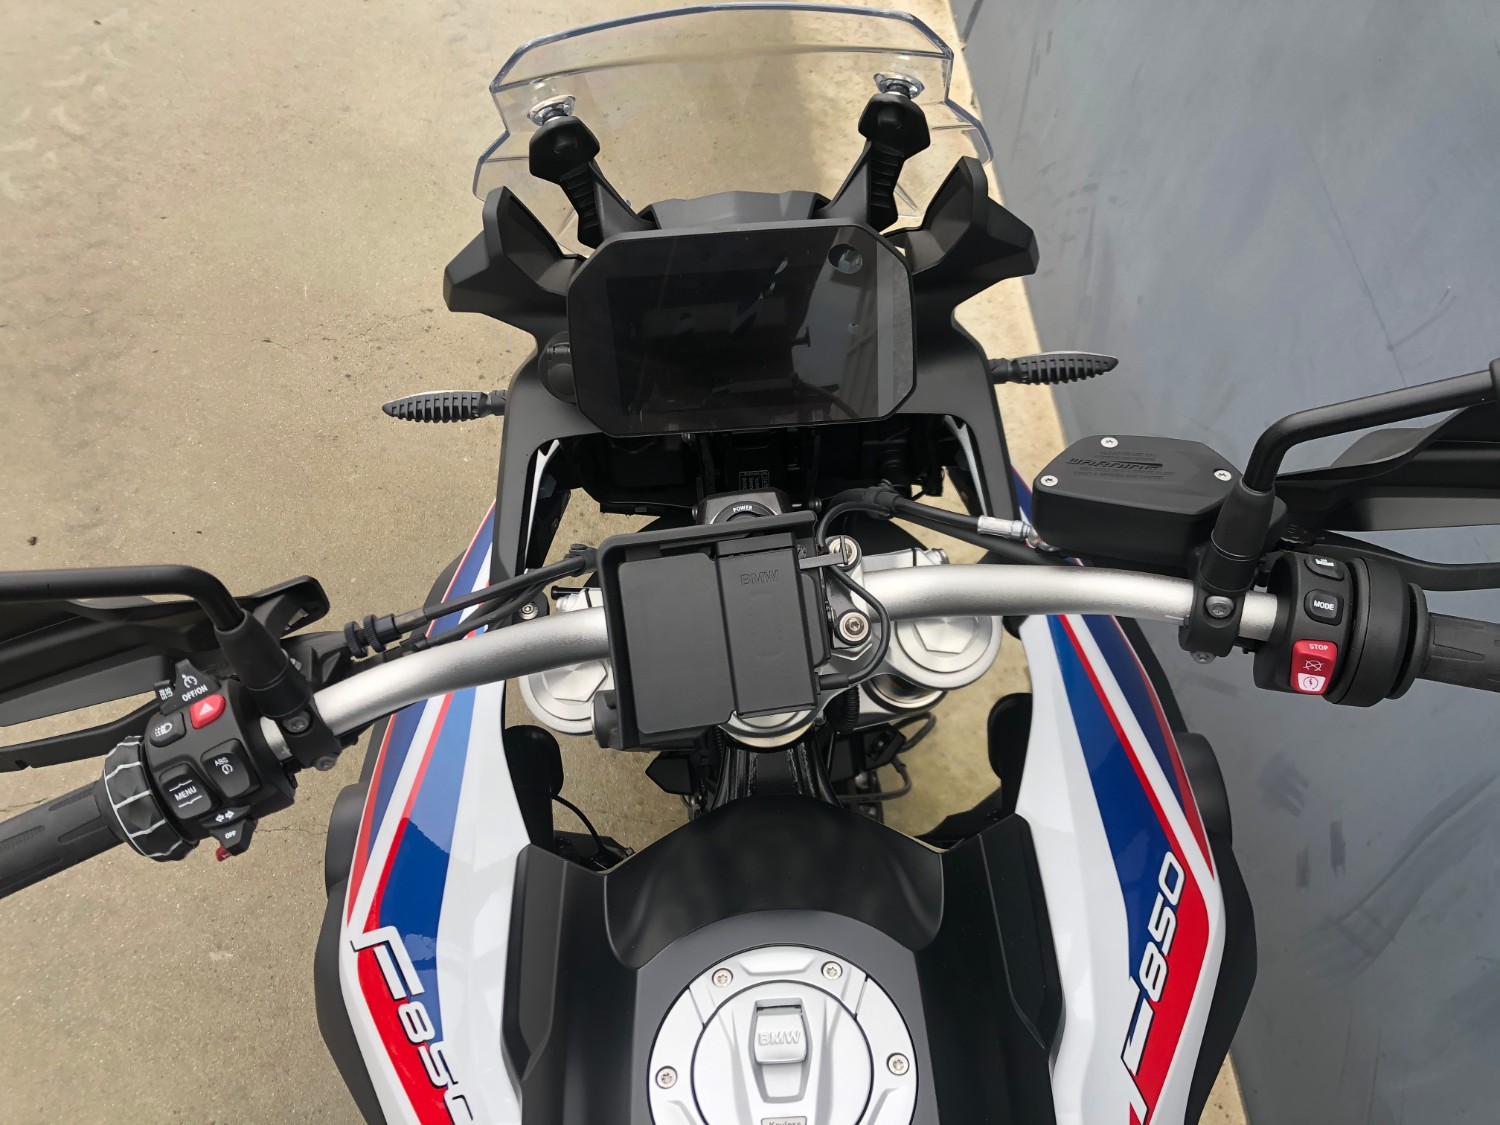 2019 BMW F850GS RallyE Low Suspension Motorcycle Image 16